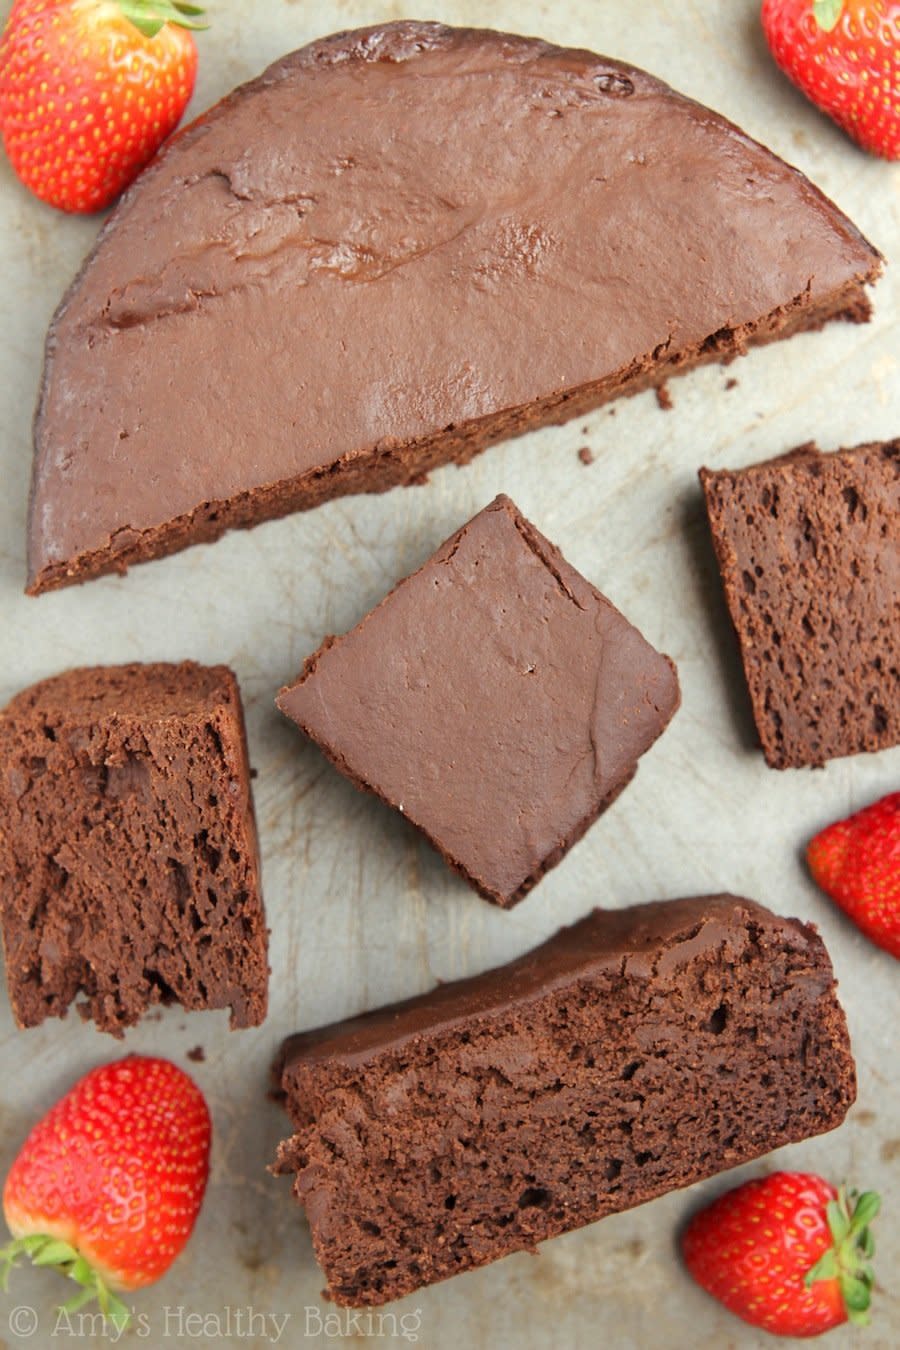 <strong>Get the <a href="http://amyshealthybaking.com/blog/2014/09/11/skinny-slow-cooker-chocolate-fudge-cake/" target="_blank">Skinny Slow Cooker Chocolate Fudge Cake recipe</a> from Amy's Healthy Baking</strong>